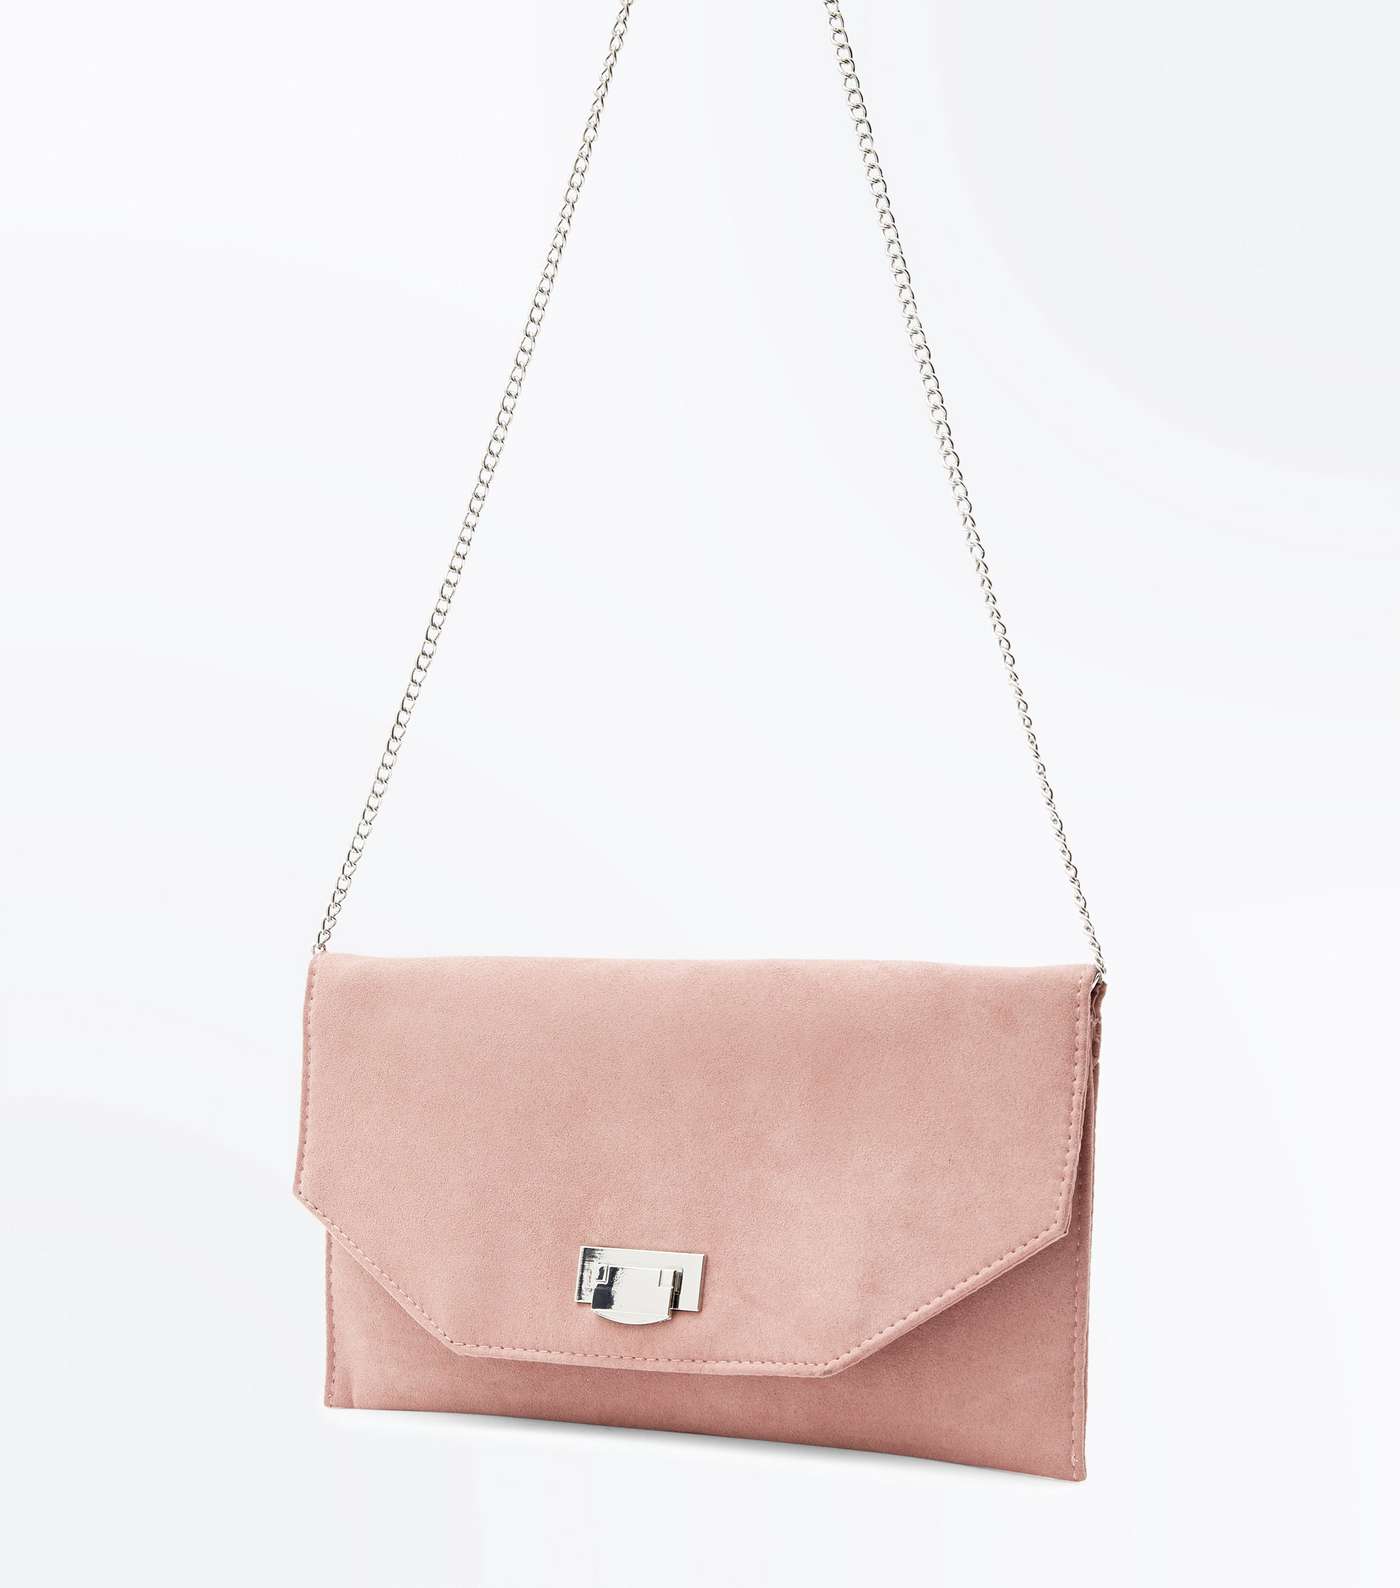 Nude Chain Strap Envelope Clutch Bag Image 3